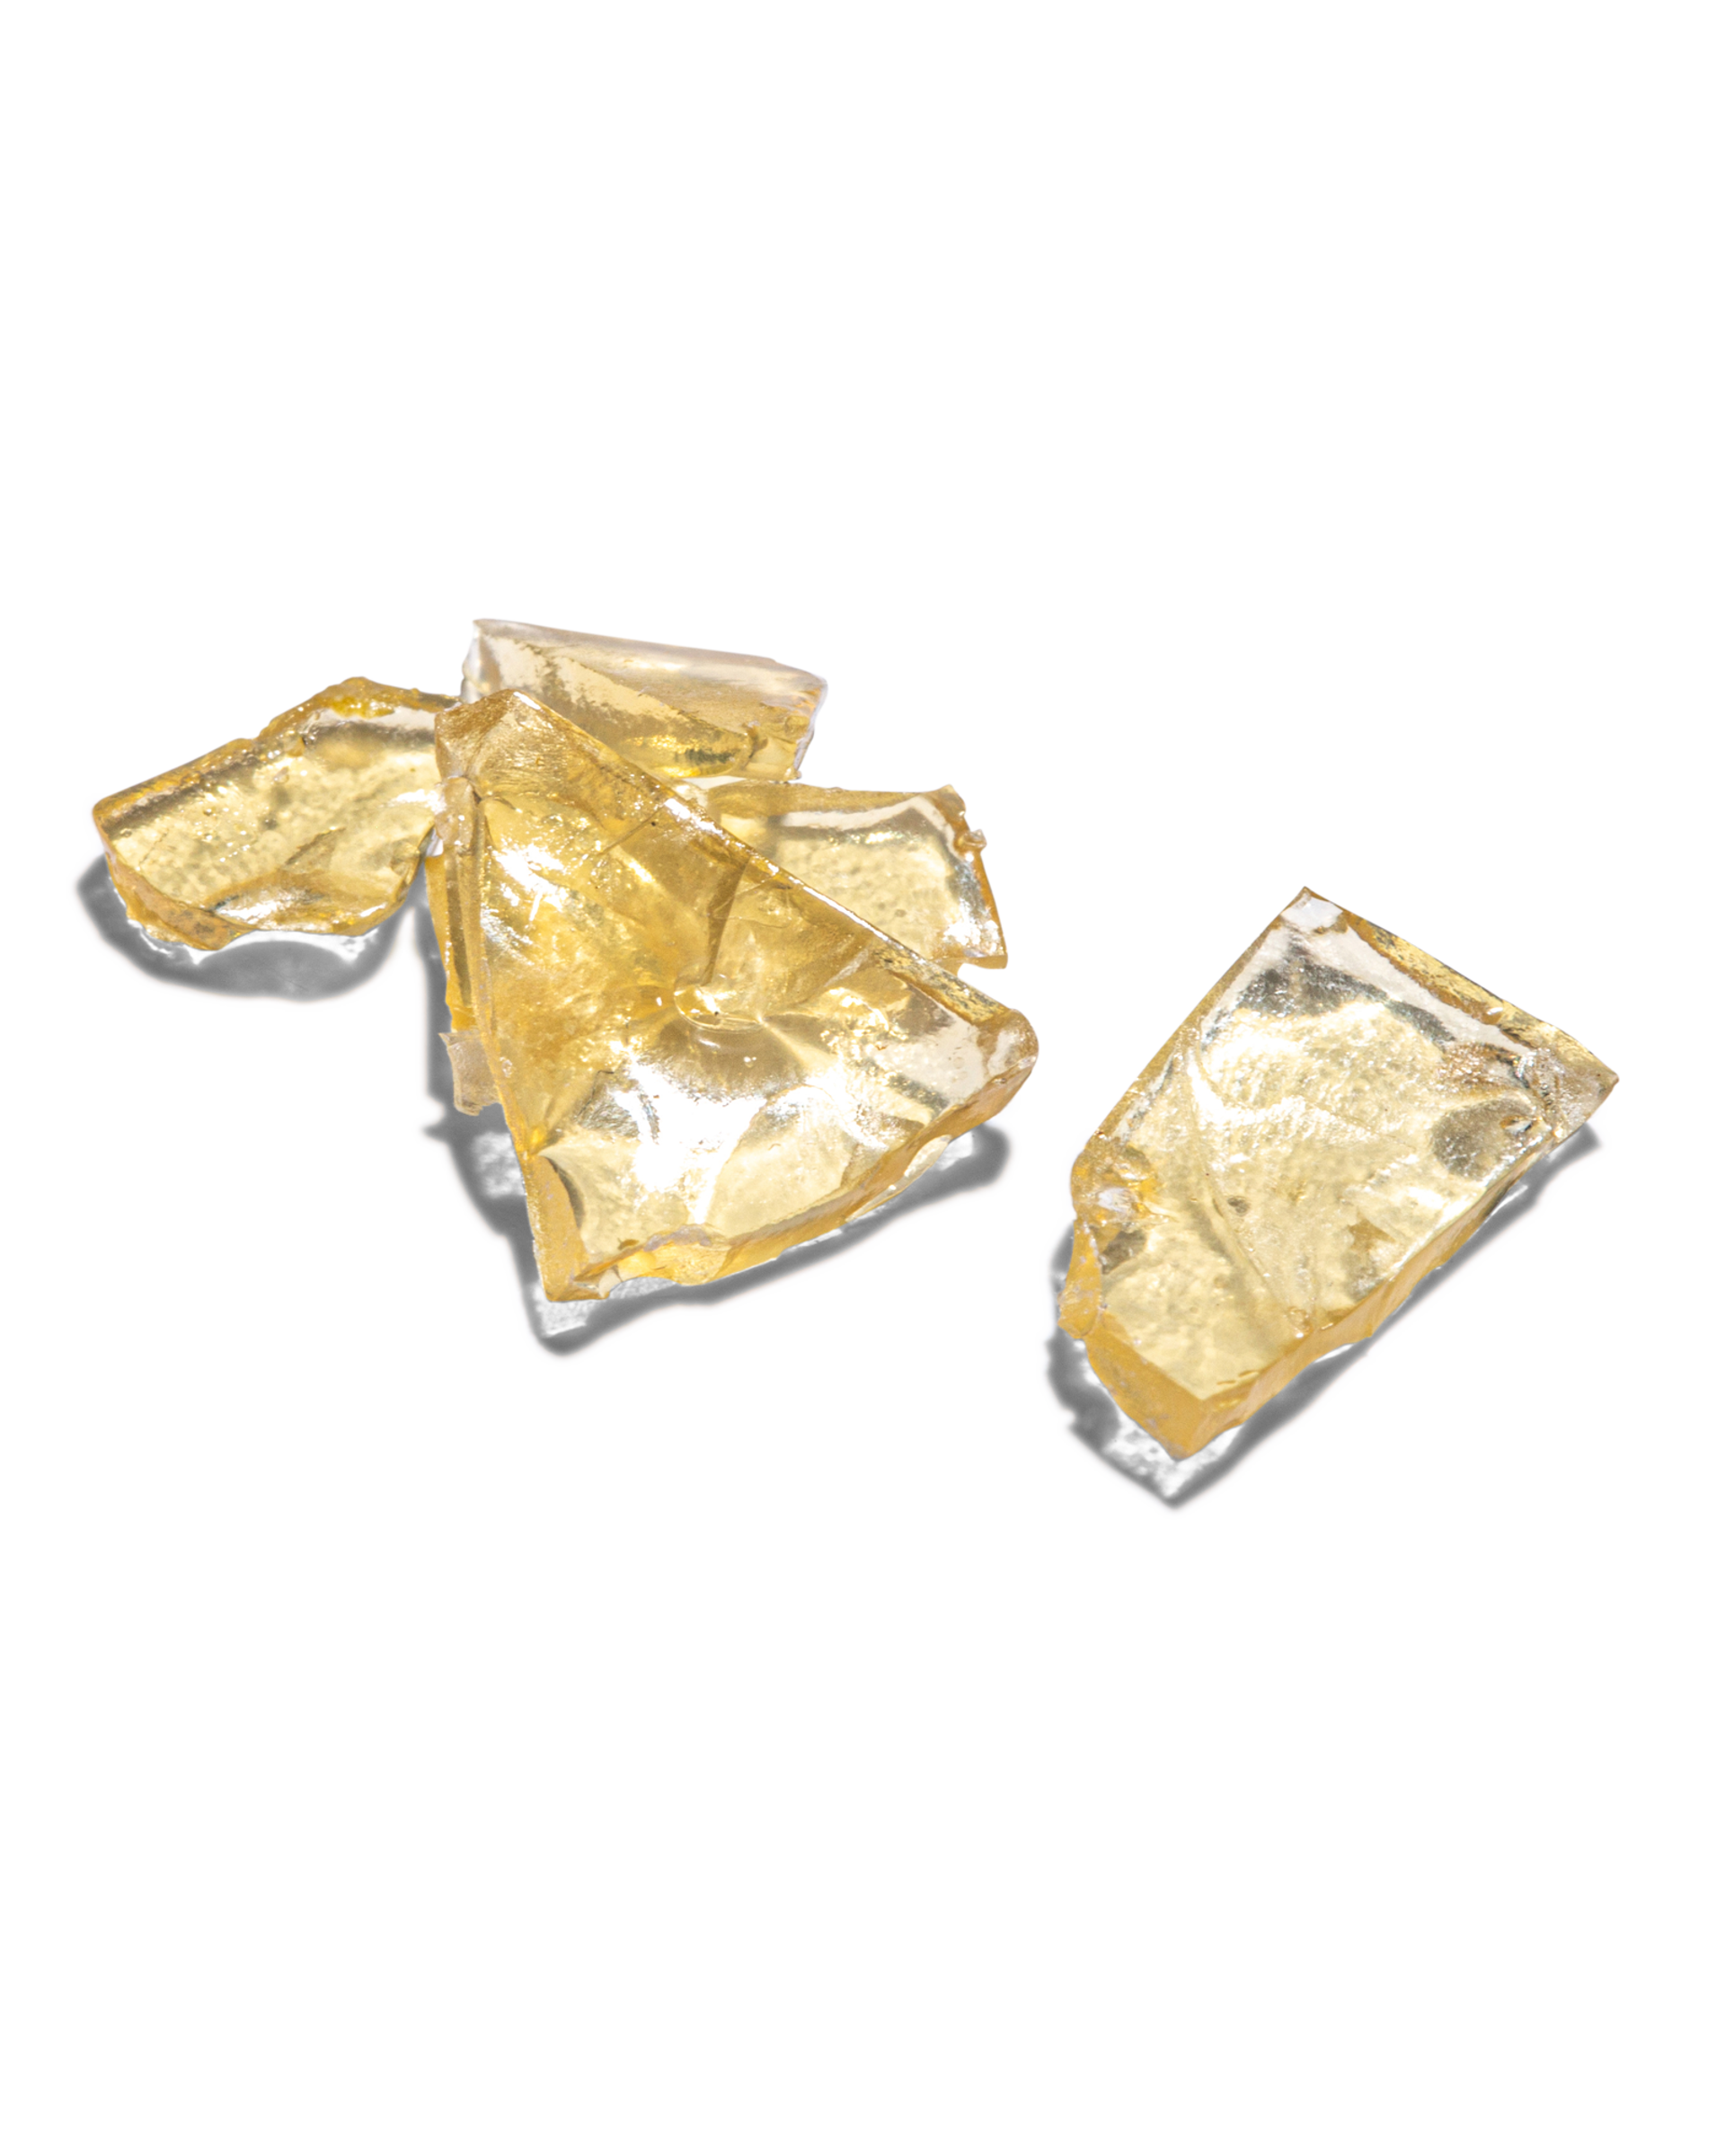 Moroccan Confectionery Shatter 1g, 2 of 2